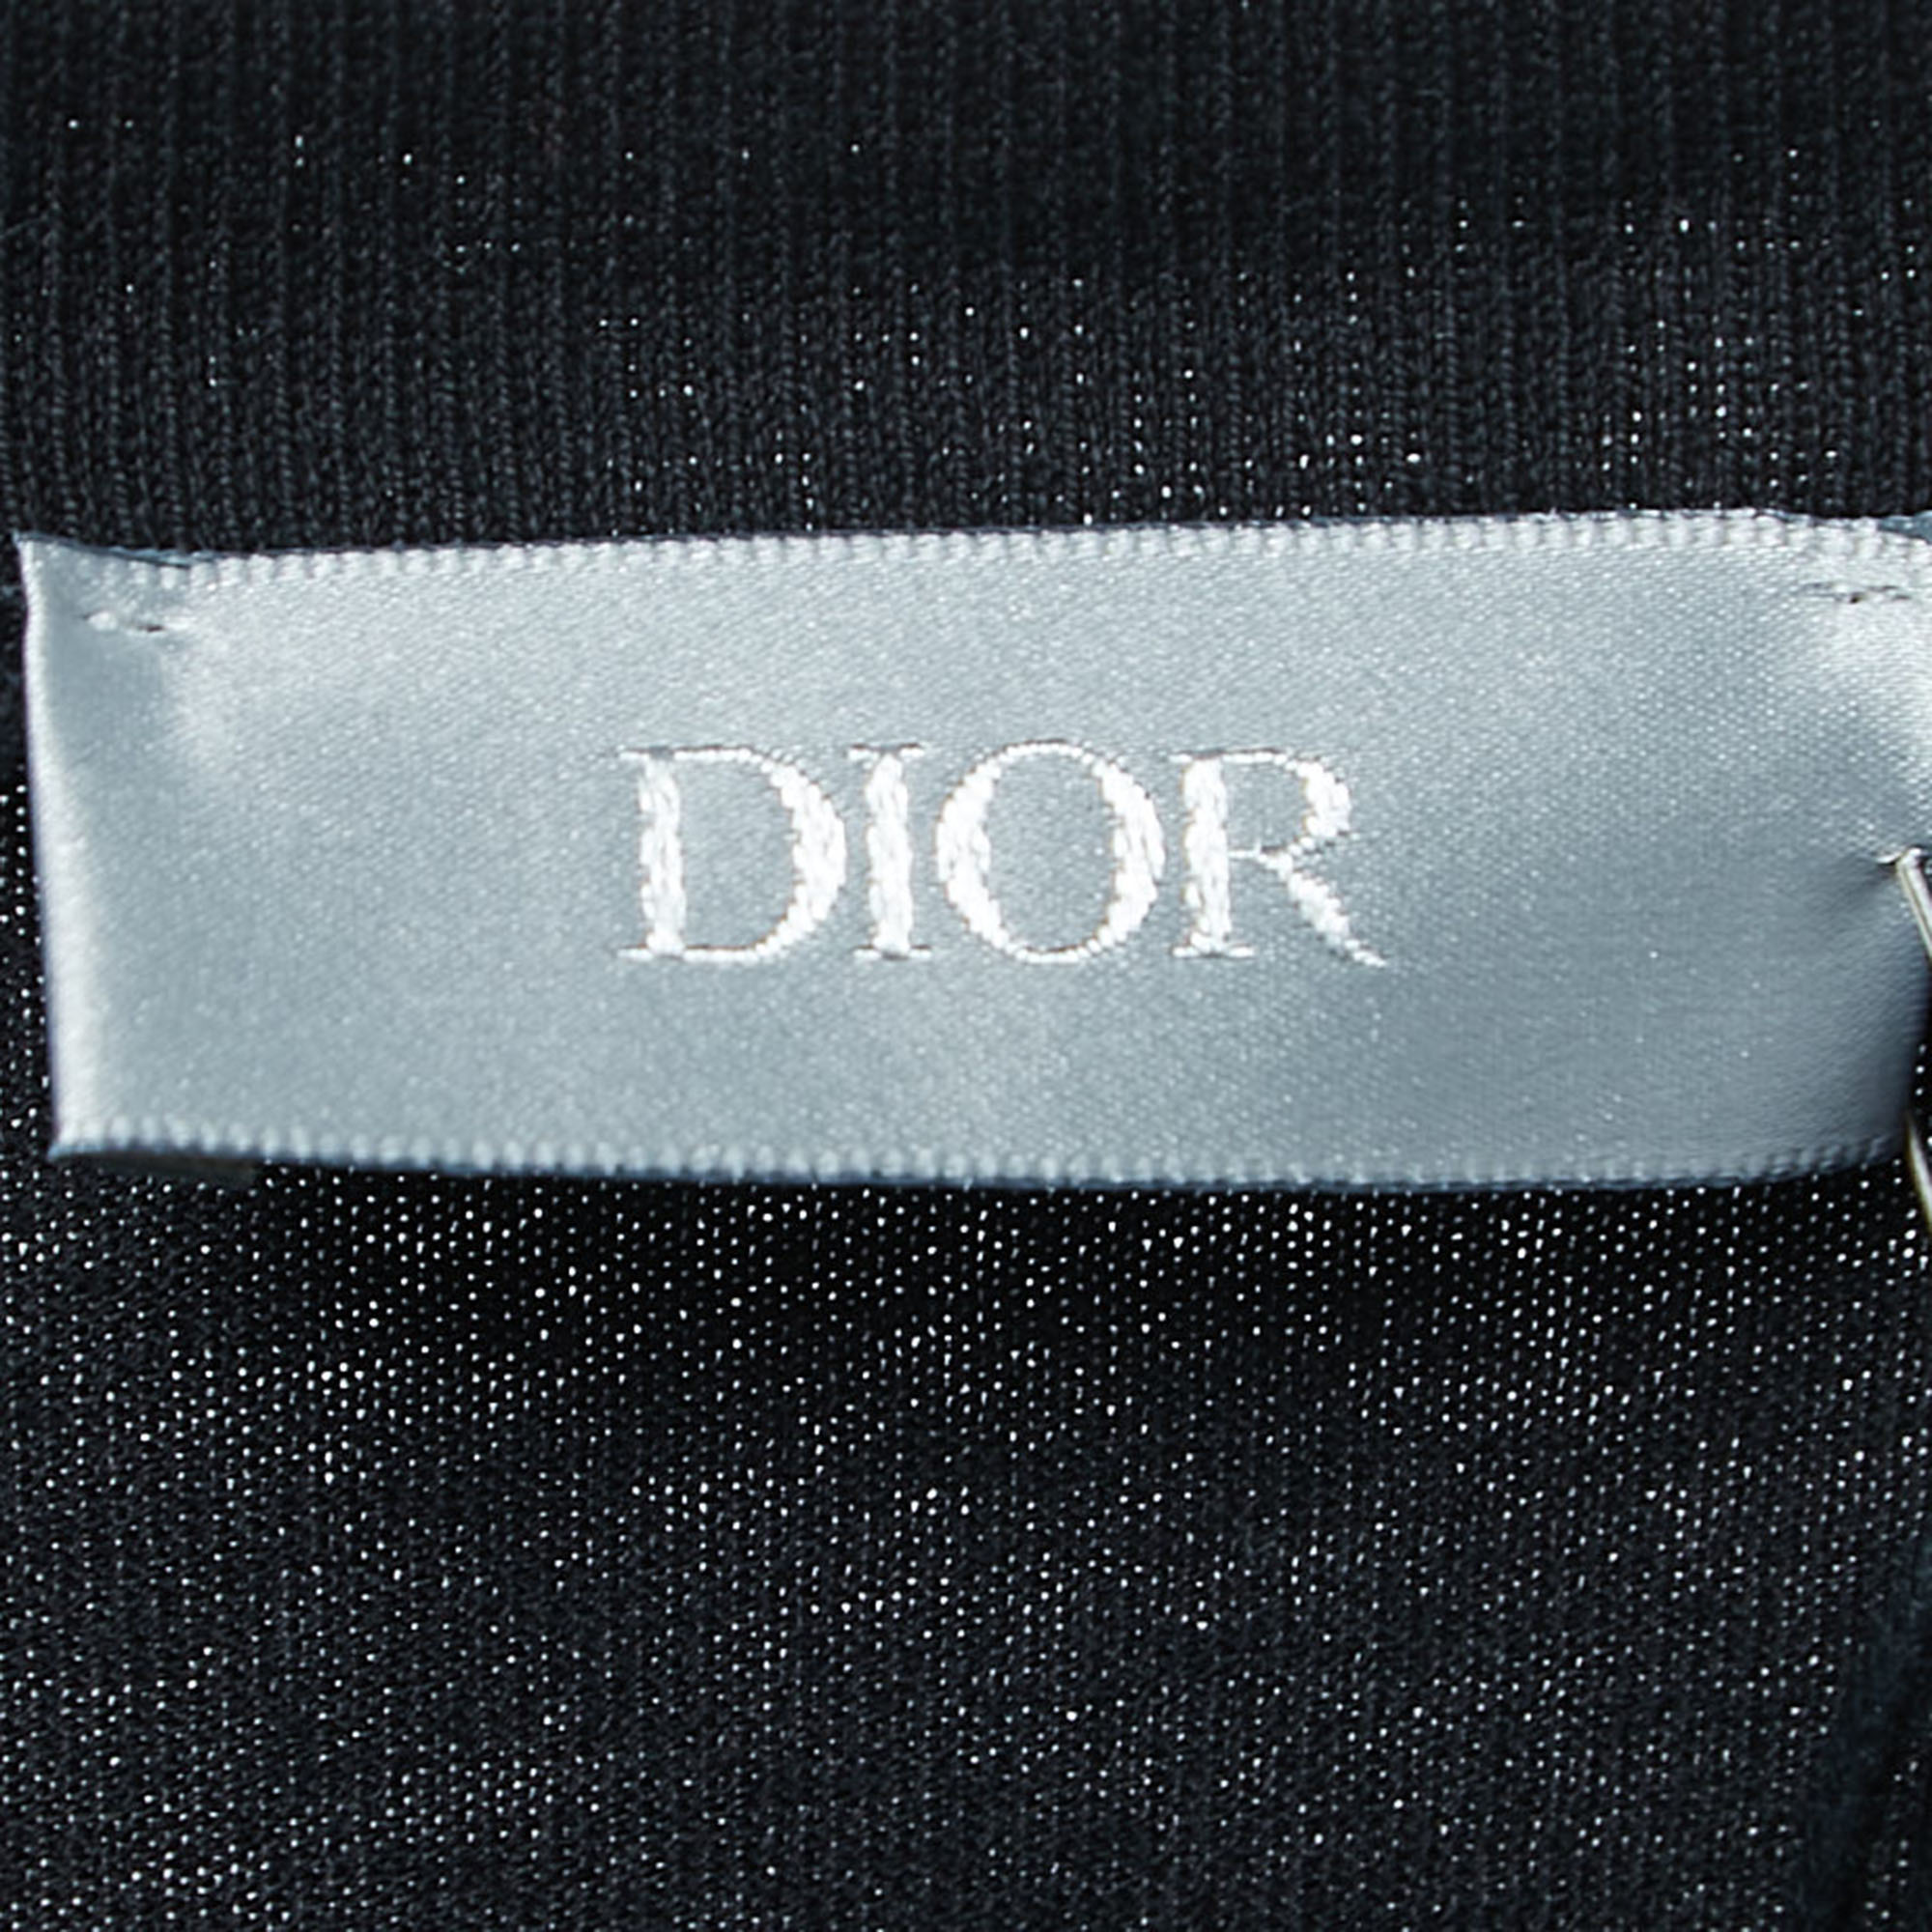 Dior Homme Black Bee Embroidered Cotton Crew Neck T-Shirt S